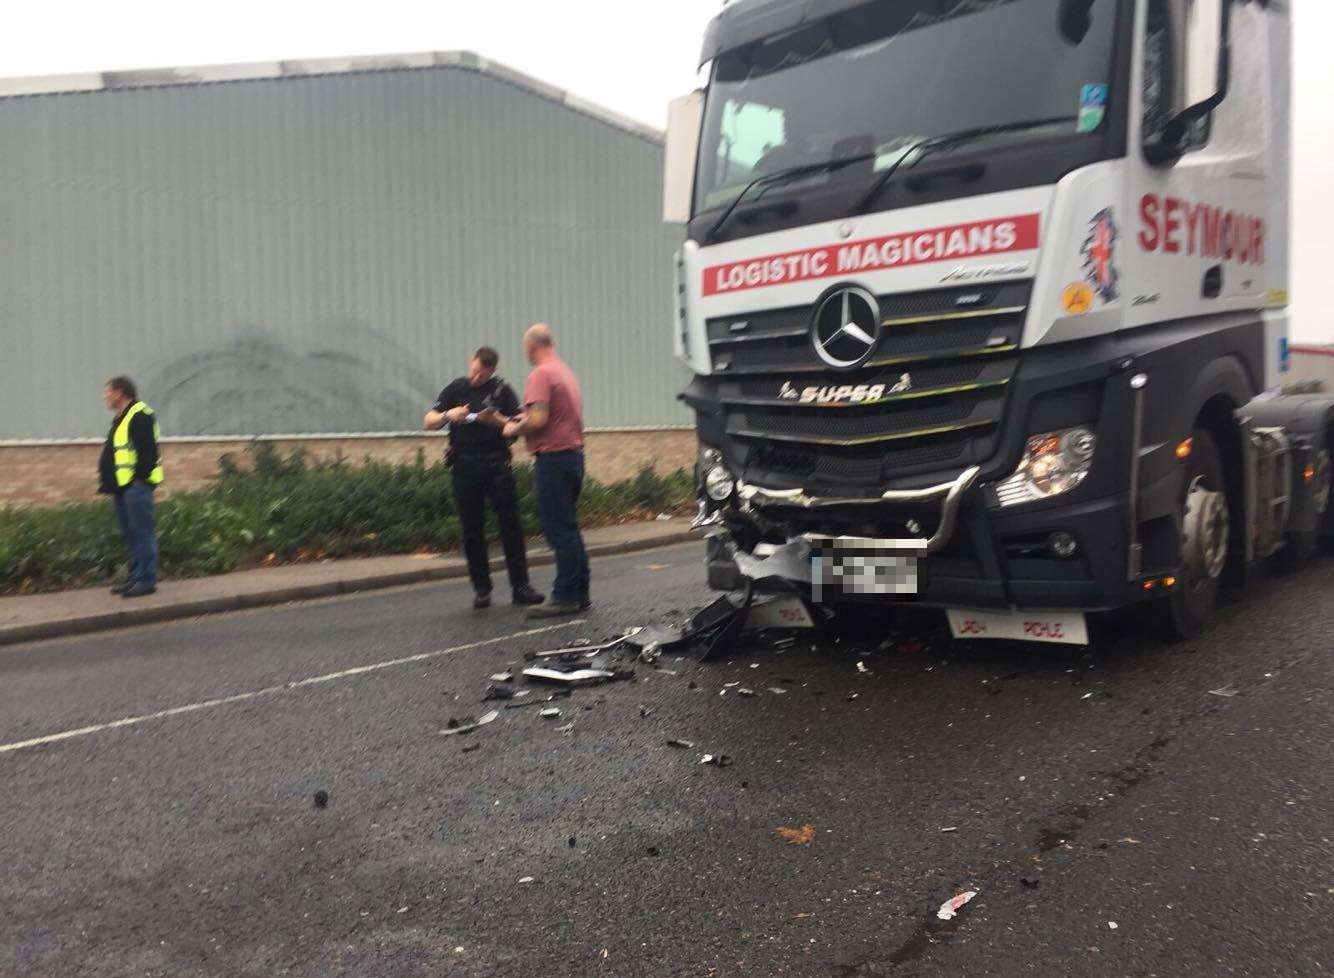 The crash has involved a lorry and a car